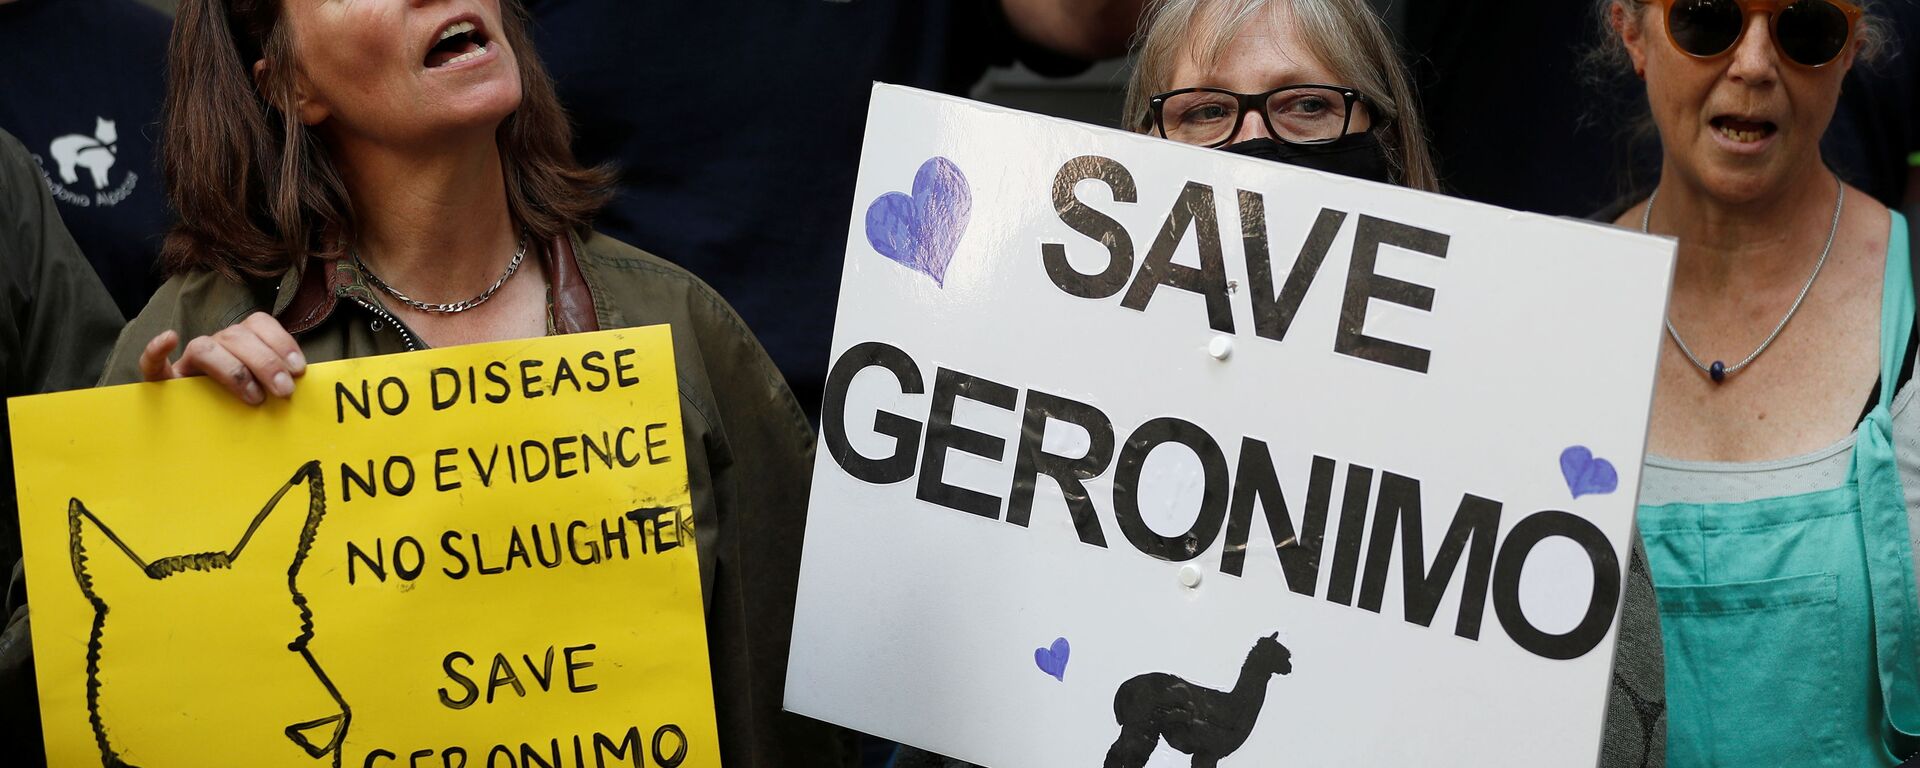 Protesters demonstrate against the ruling that Geronimo, an Alpaca believed to be carrying TB, has to be euthanised, in London - Sputnik International, 1920, 31.08.2021